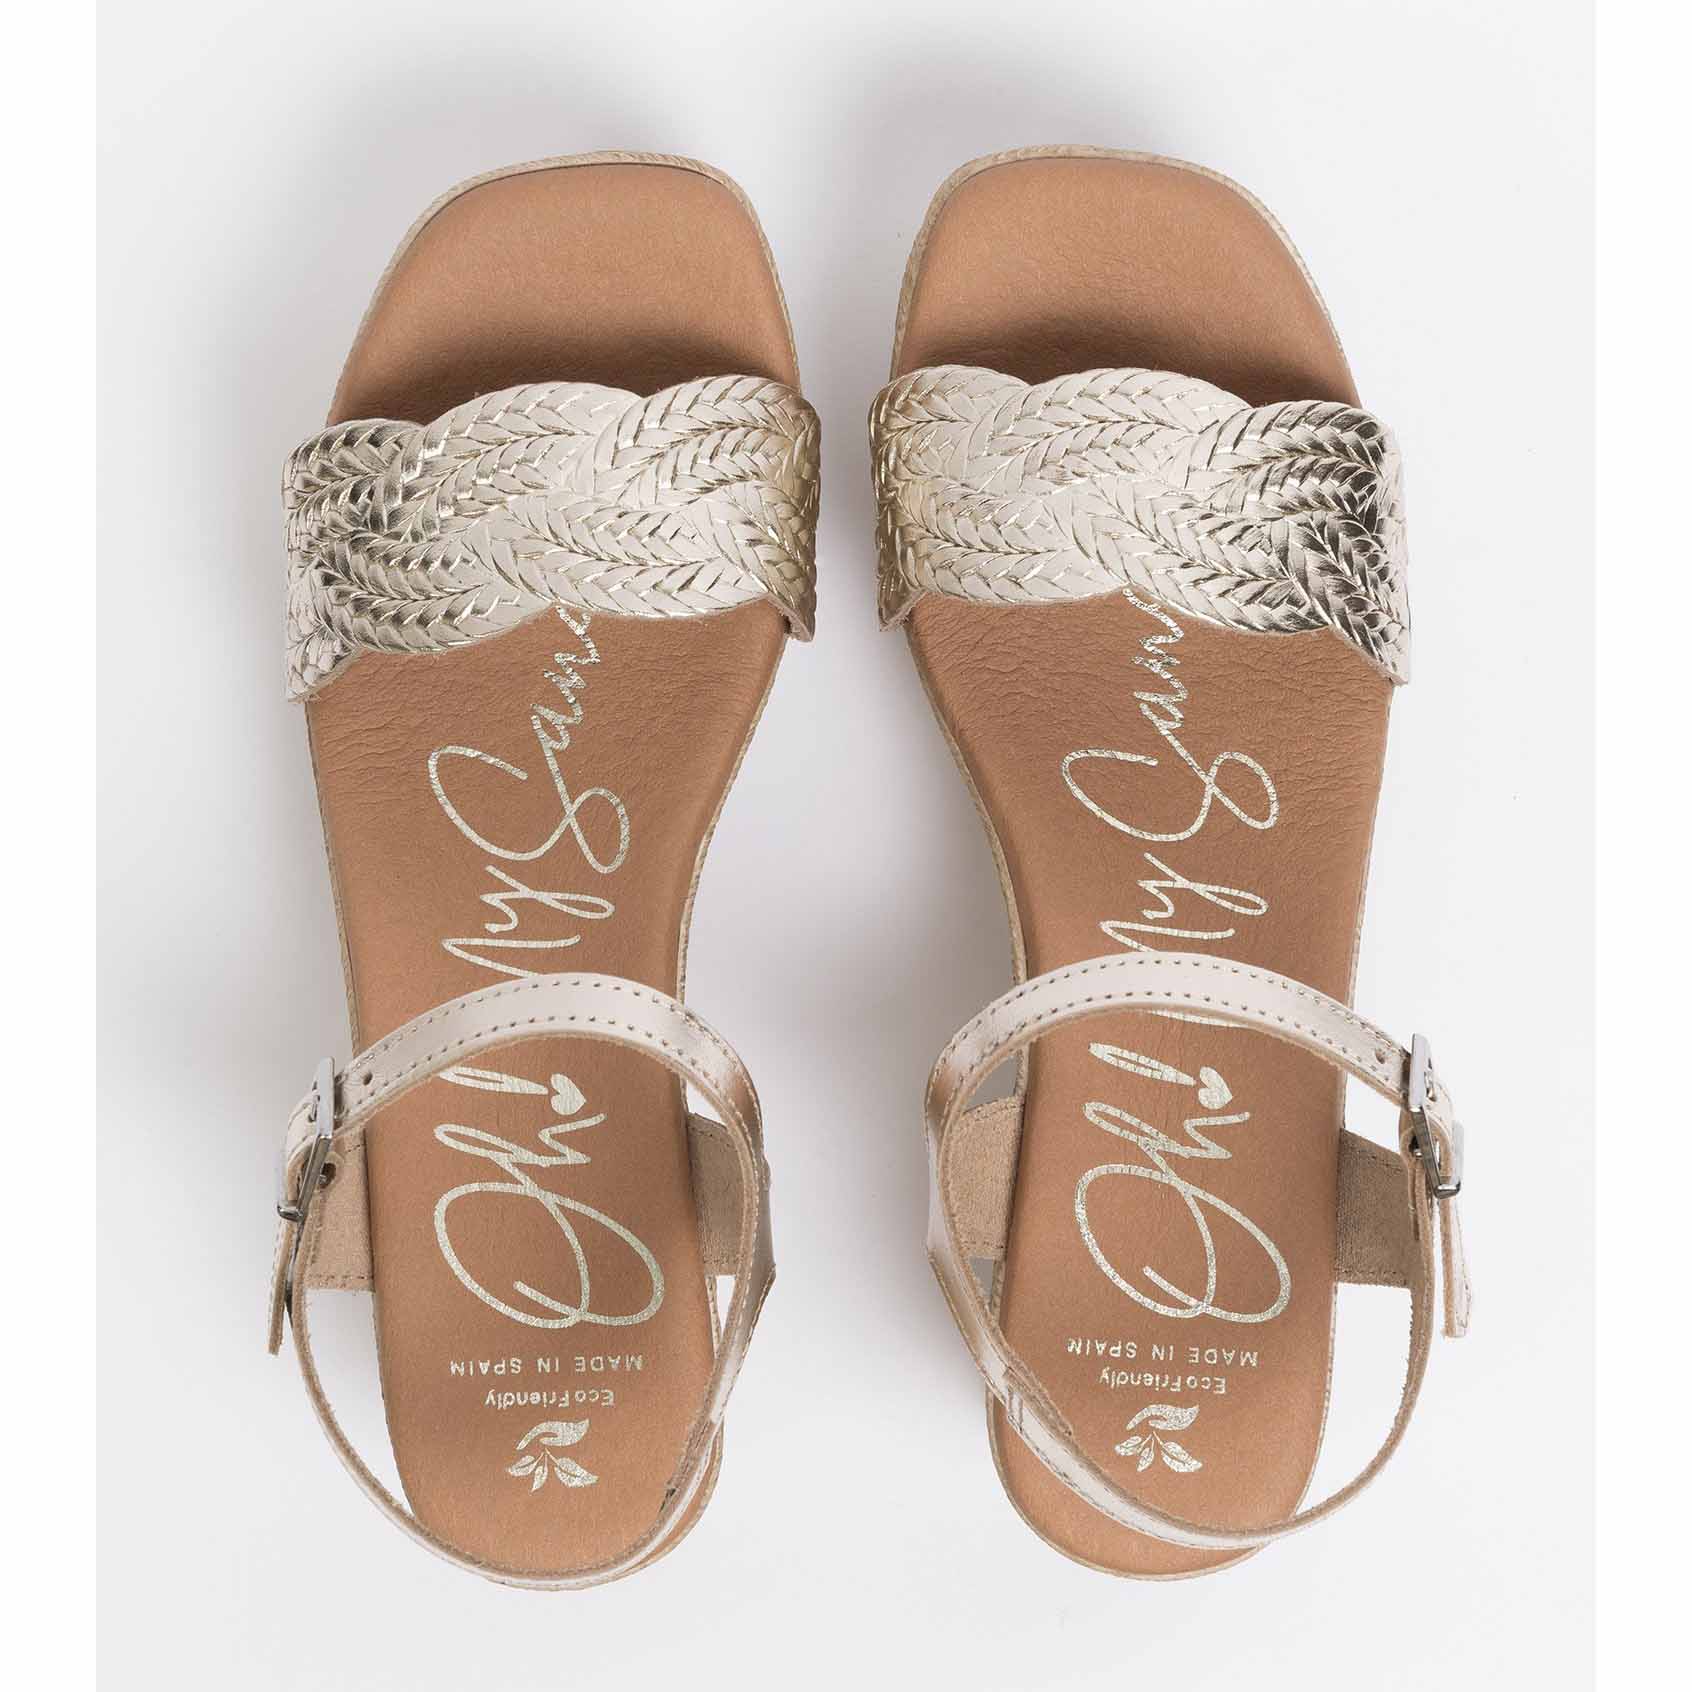 Oh My Sandals Sandali Champagne in pelle Made in Spagna